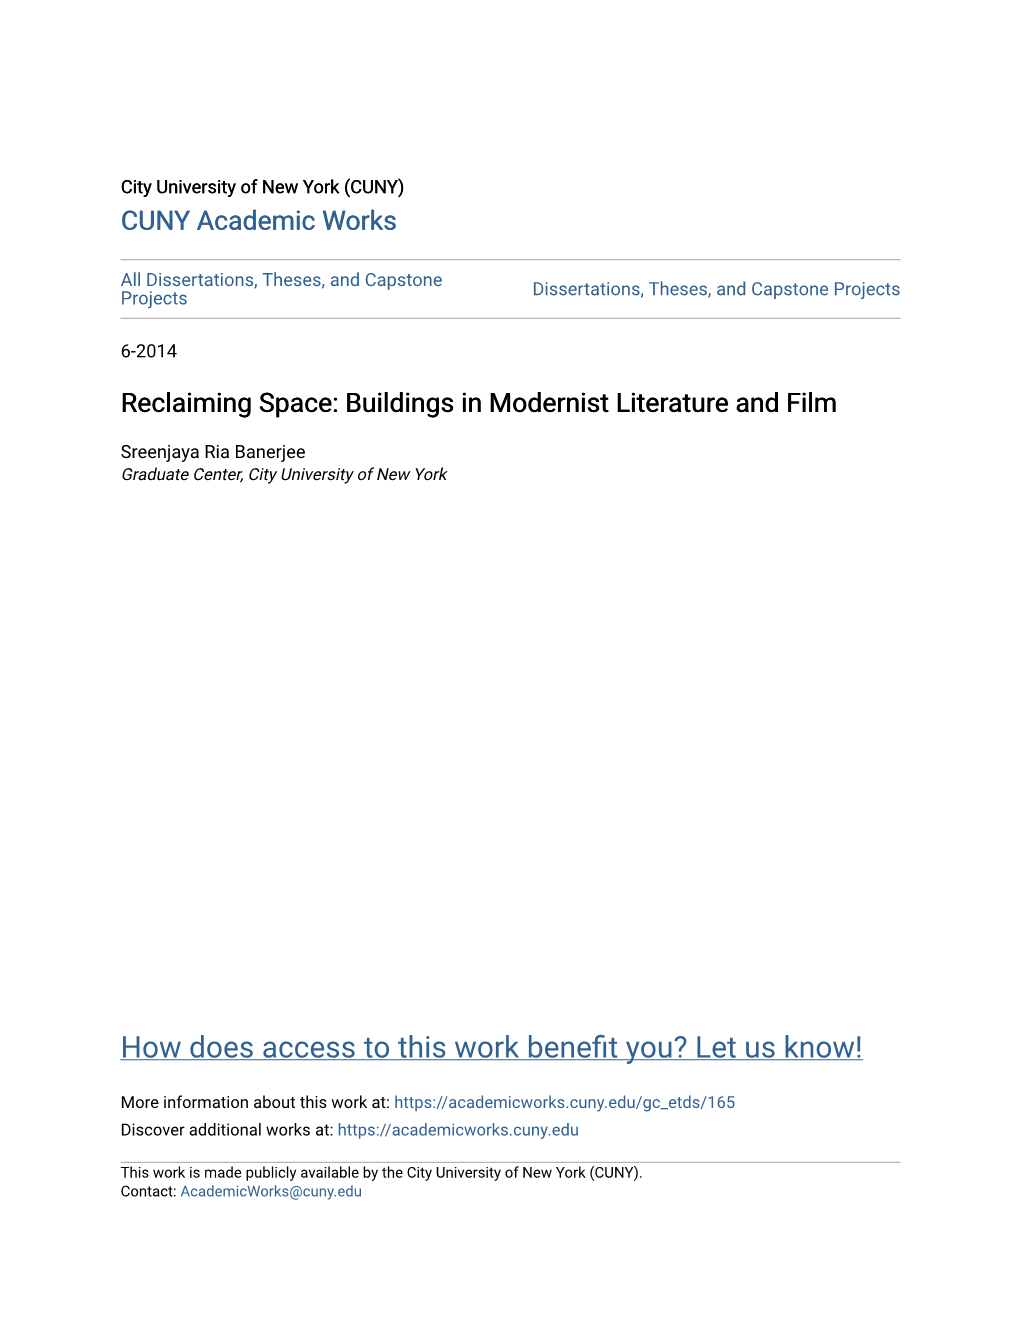 Buildings in Modernist Literature and Film